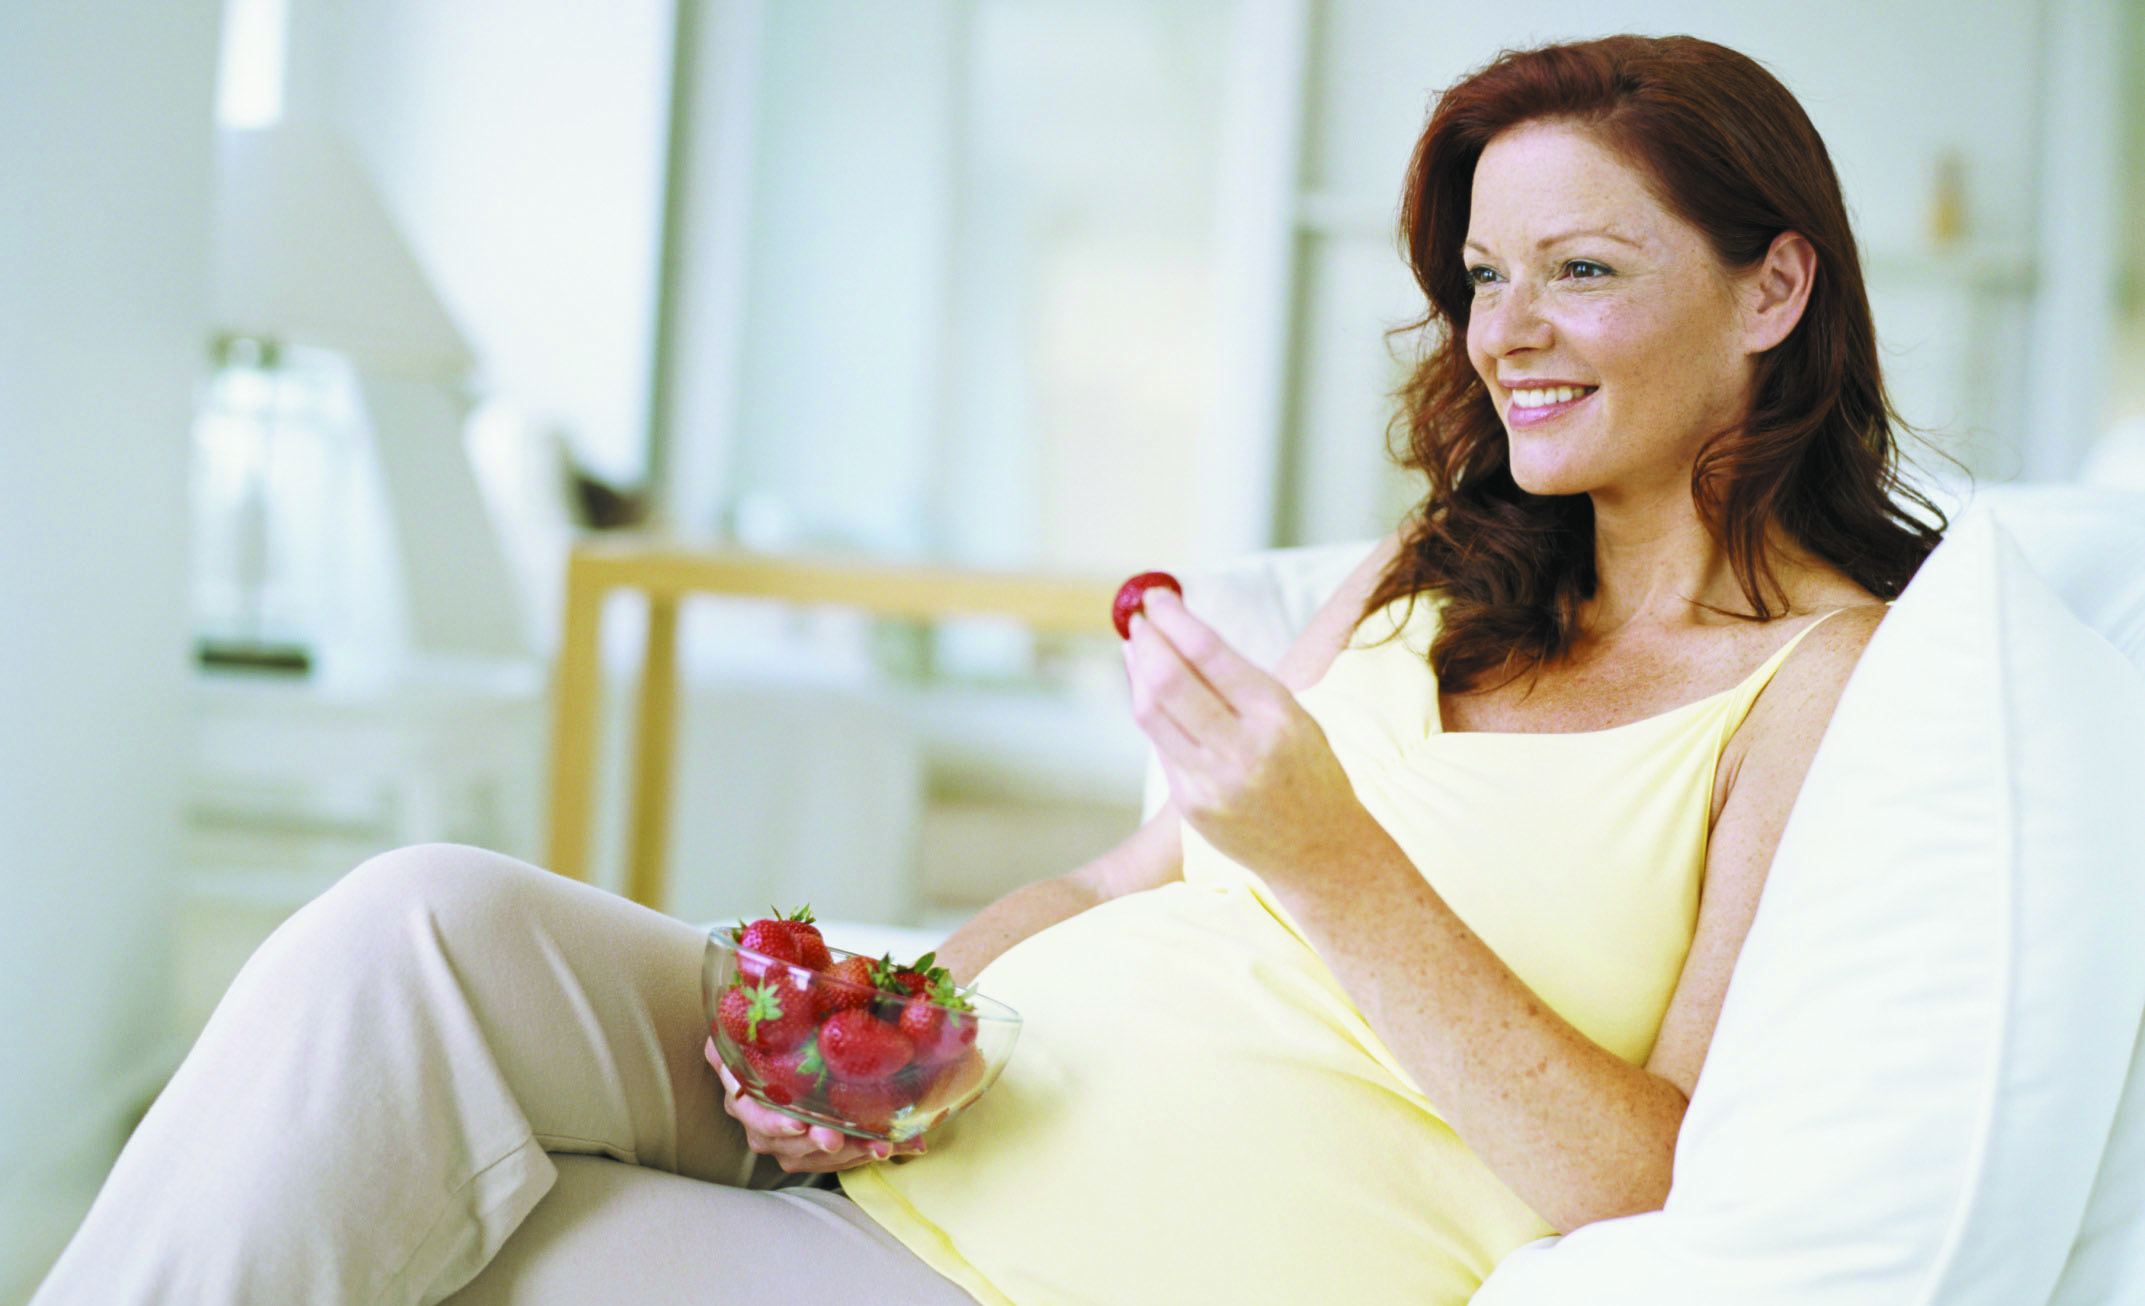 A Pregnant woman eating a healthy snack